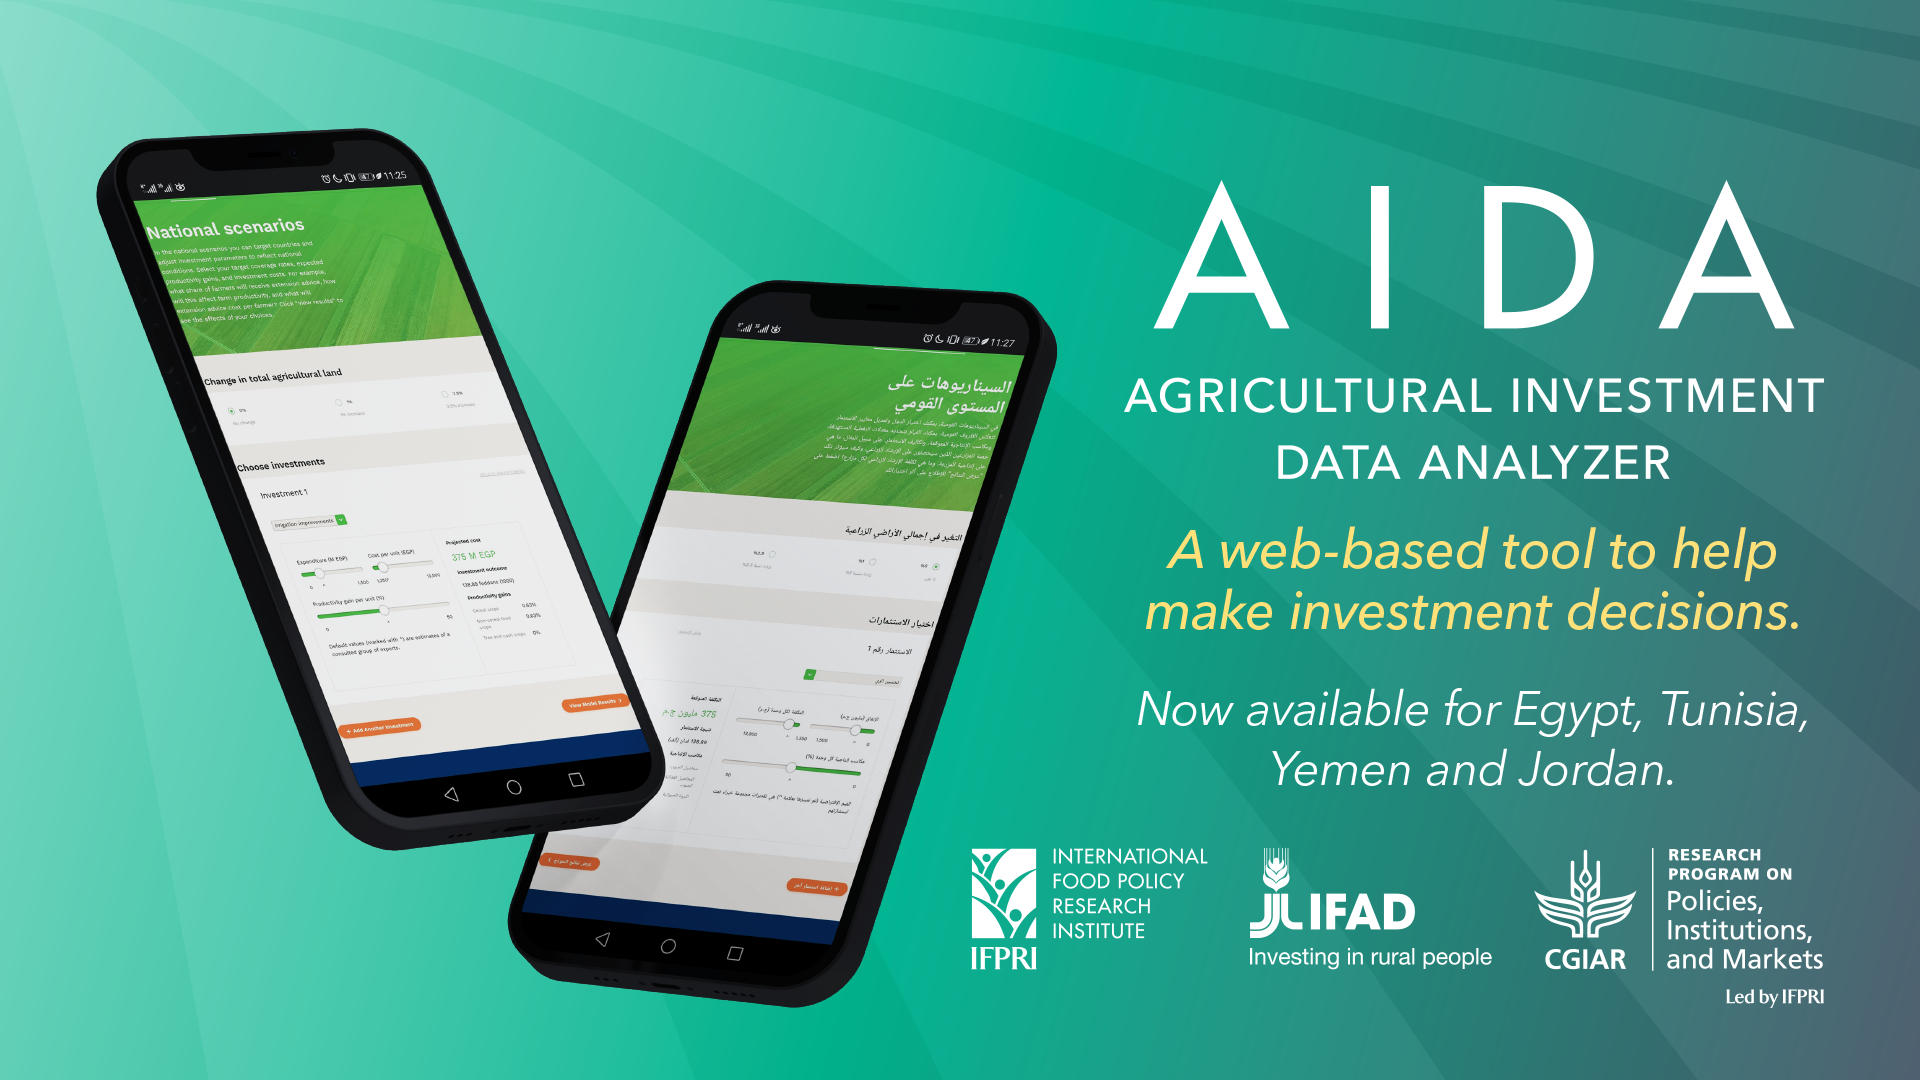 Launch event: Agricultural Investment Data Analyzer (AIDA) guides policy makers on potential economic and social impacts